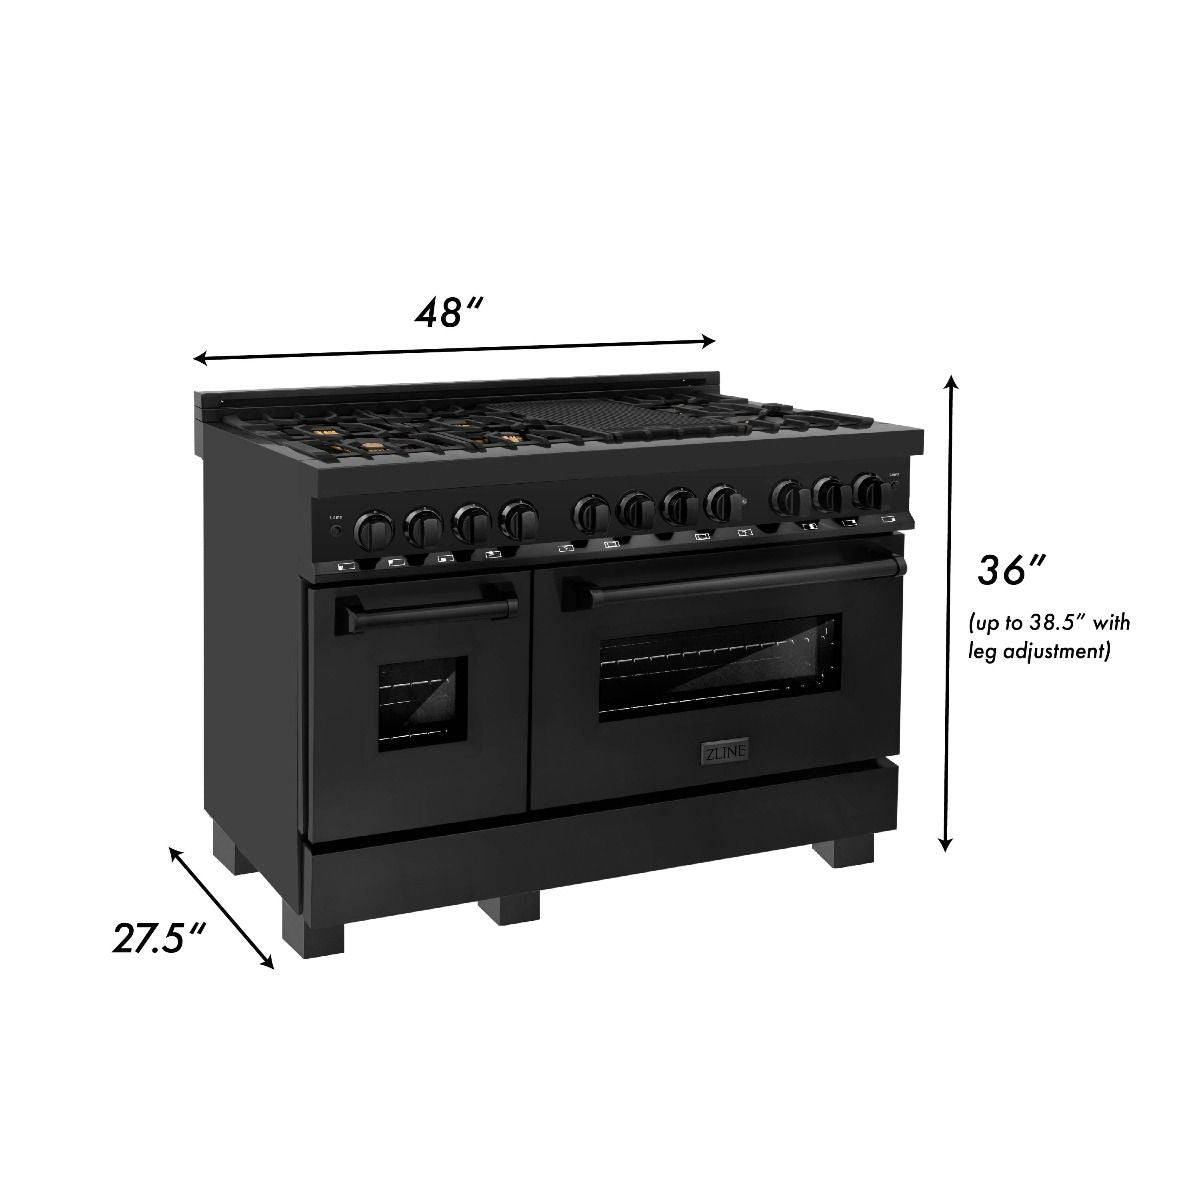 ZLINE 48" Kitchen Package with Black Stainless Steel Dual Fuel Range, Convertible Vent Range Hood and 24" Microwave Oven